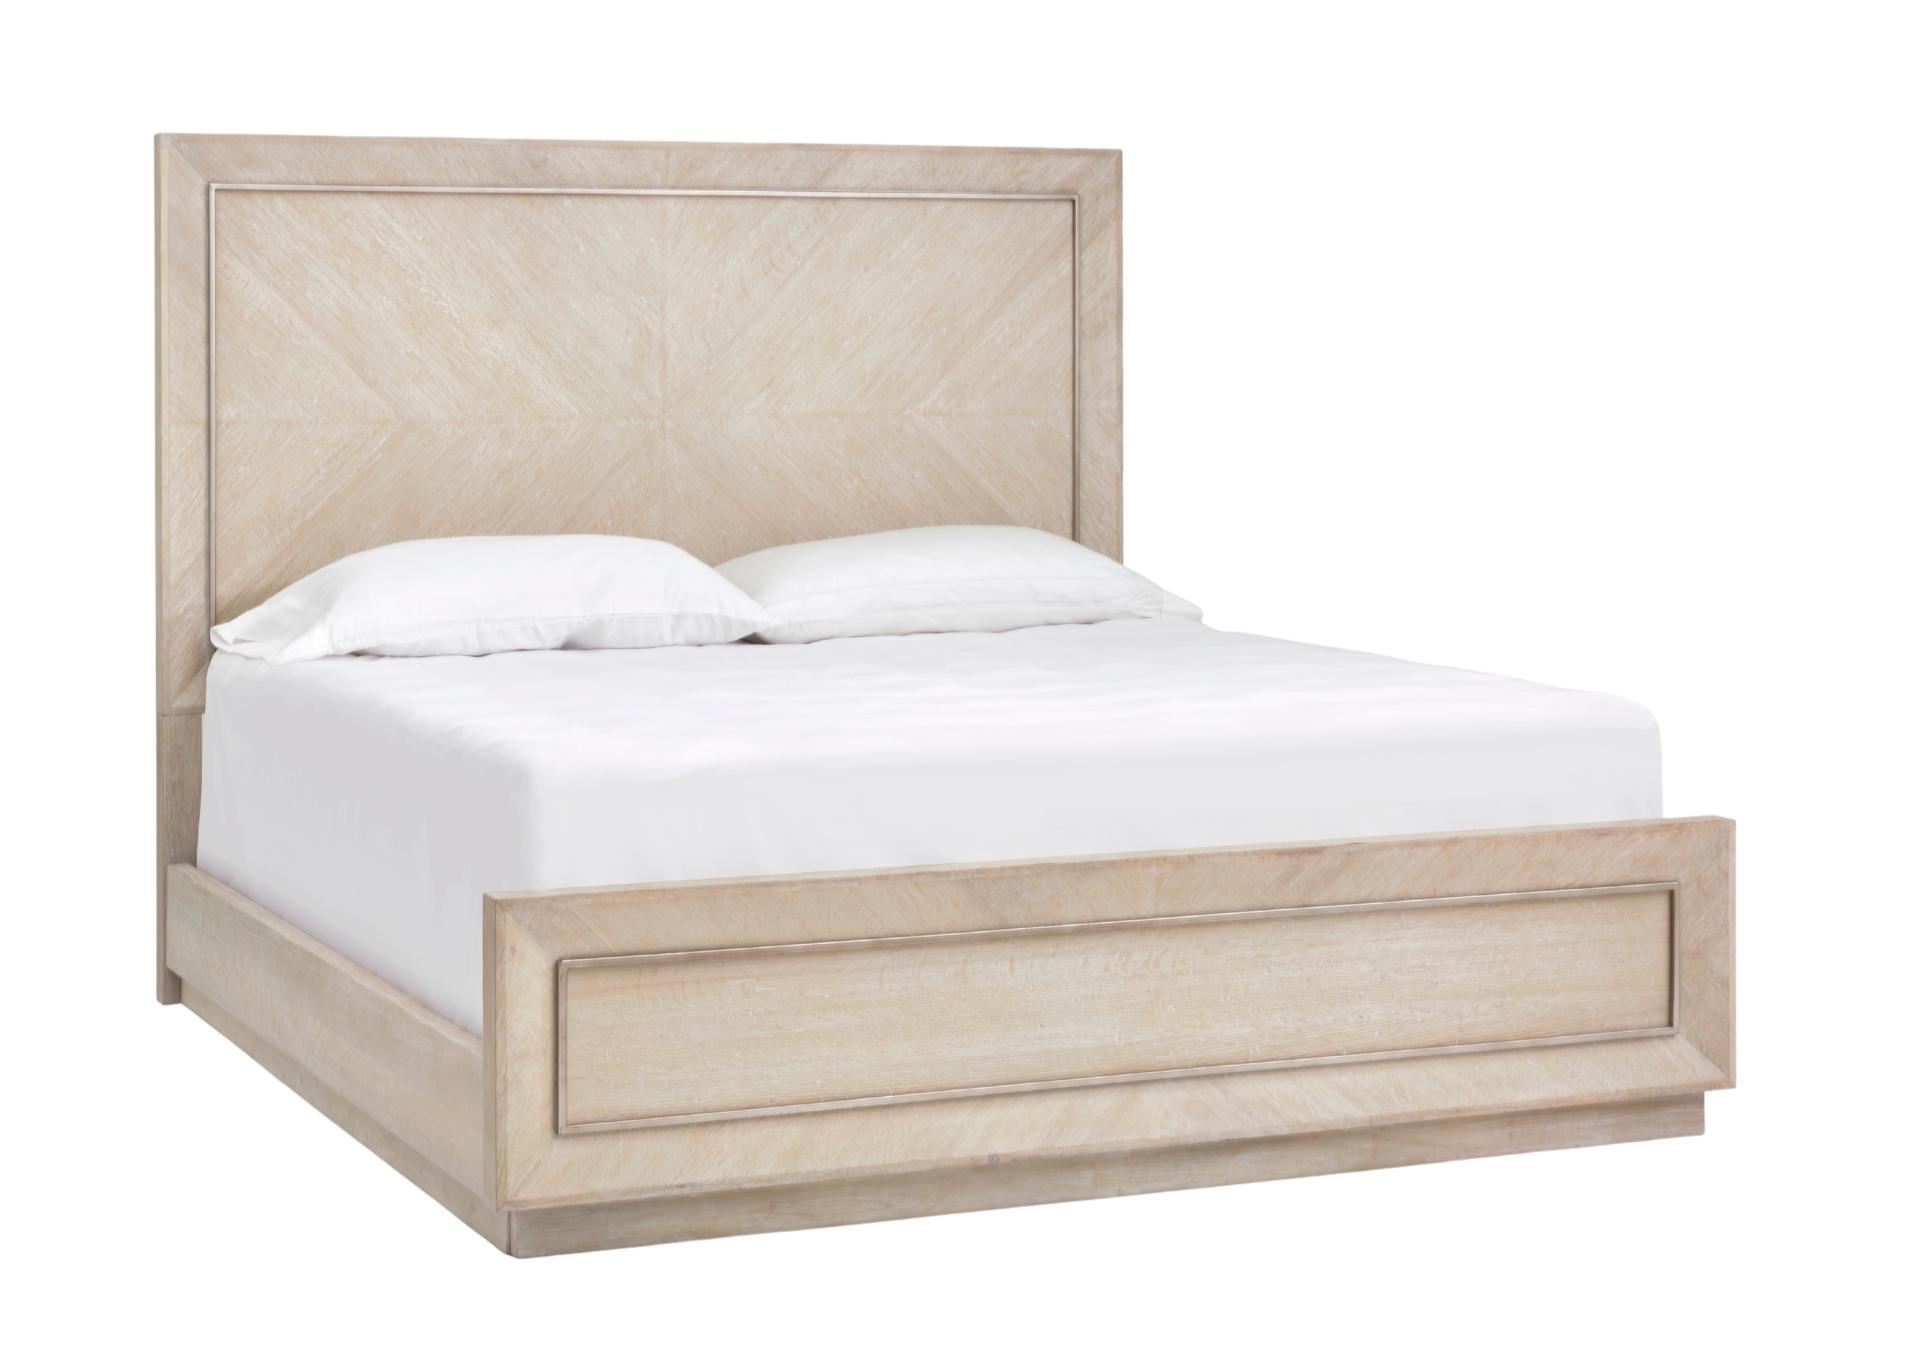 AMHERST WHITEWASH QUEEN PANEL BED,MAGS